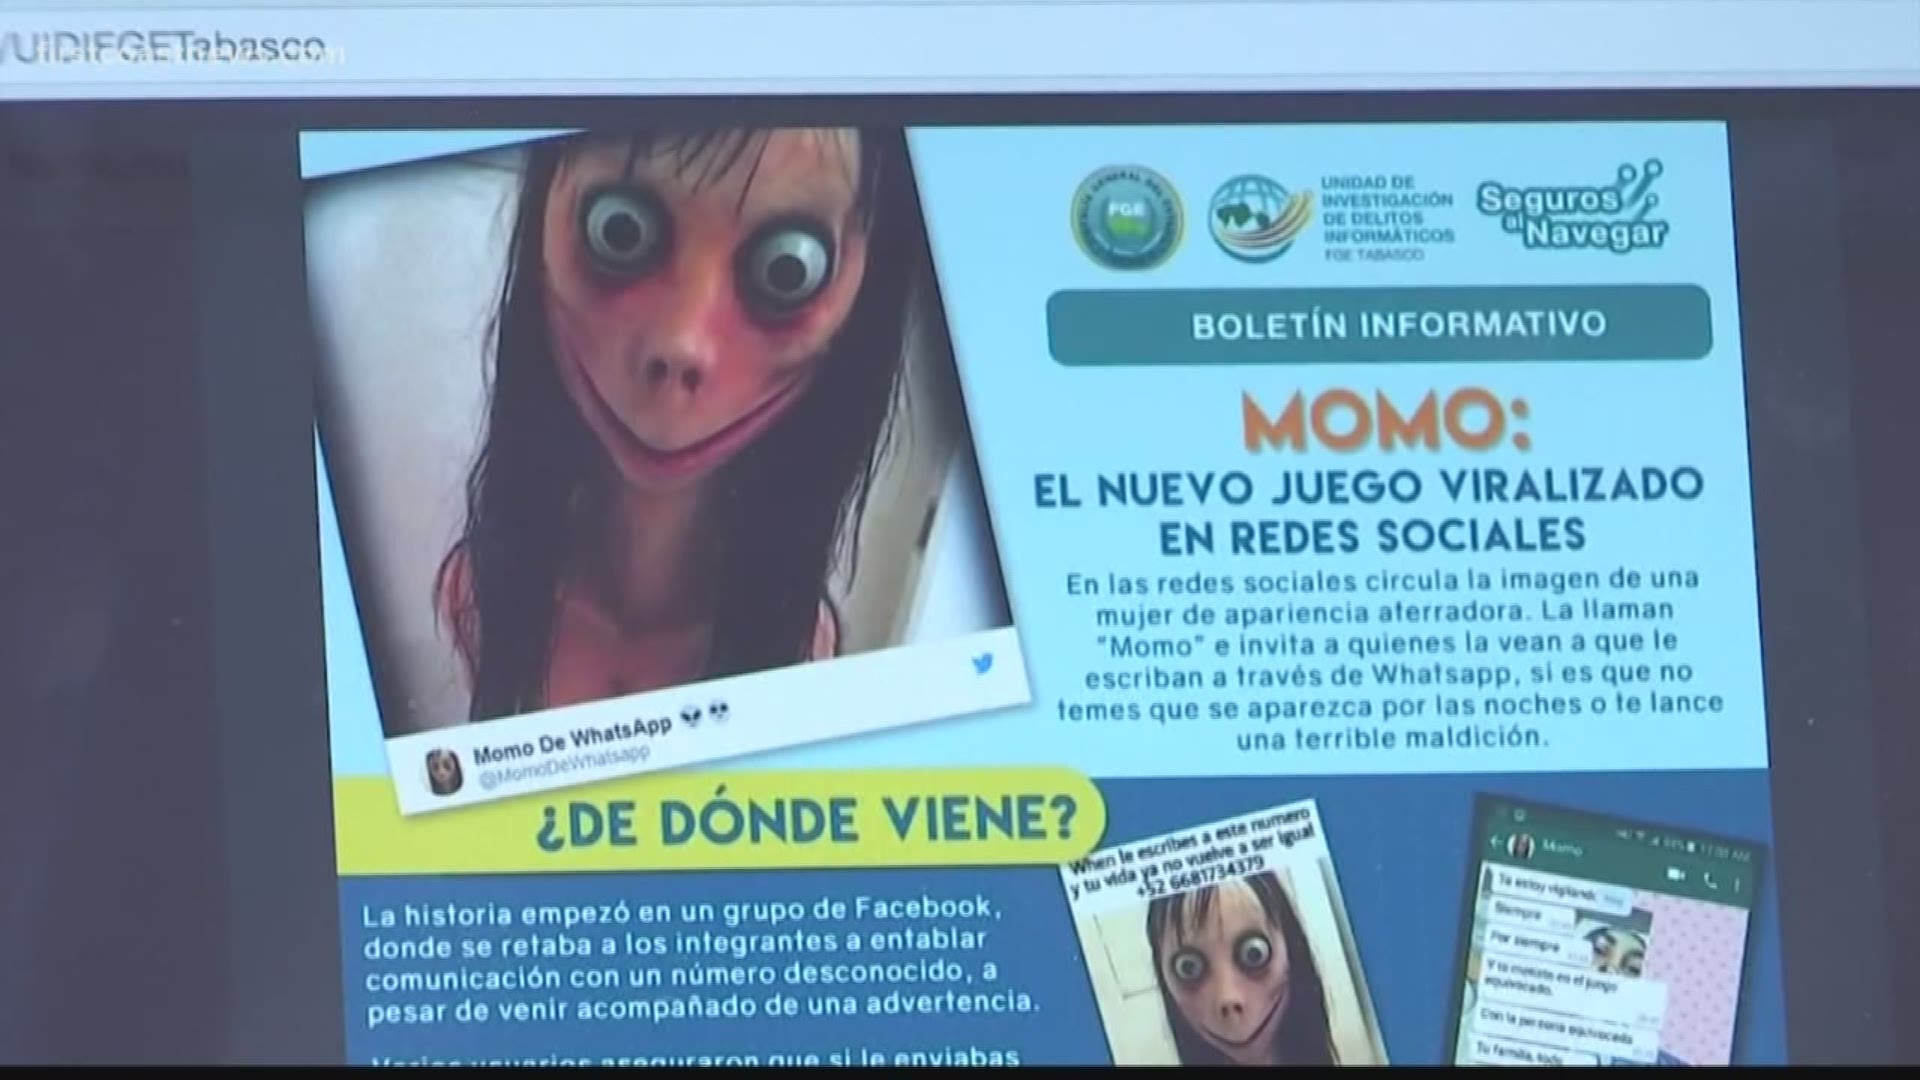 When questioned about the validity of the claims, deputies said they are erring on the side of caution despite being called out by local reporters saying that the 'Momo' challenge is a viral hoax.